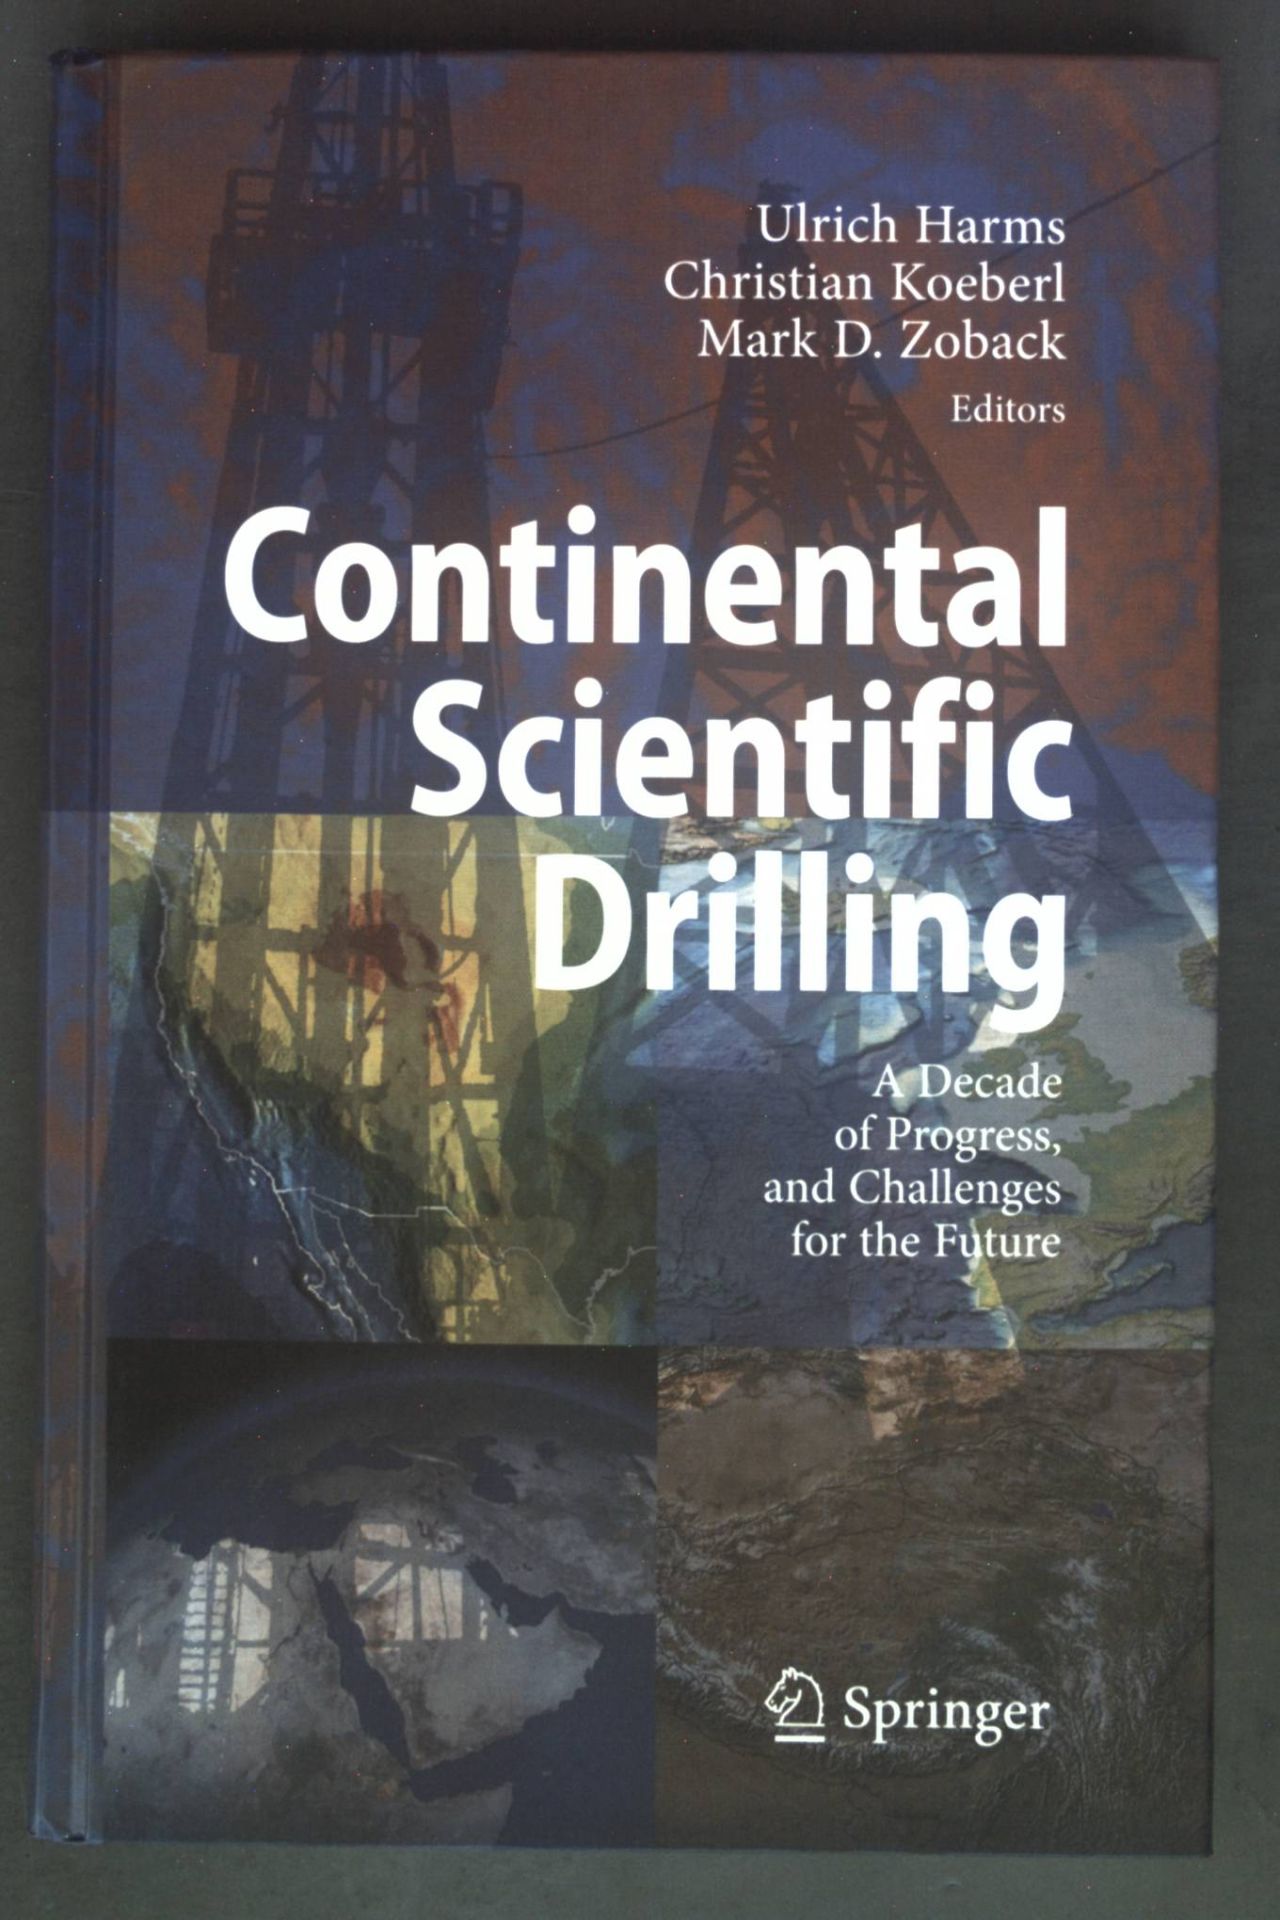 Continental scientific drilling : a decade of progress and challenges for the future. - Harms, Ulrich, Christian Koeberl and Mark D. Zoback